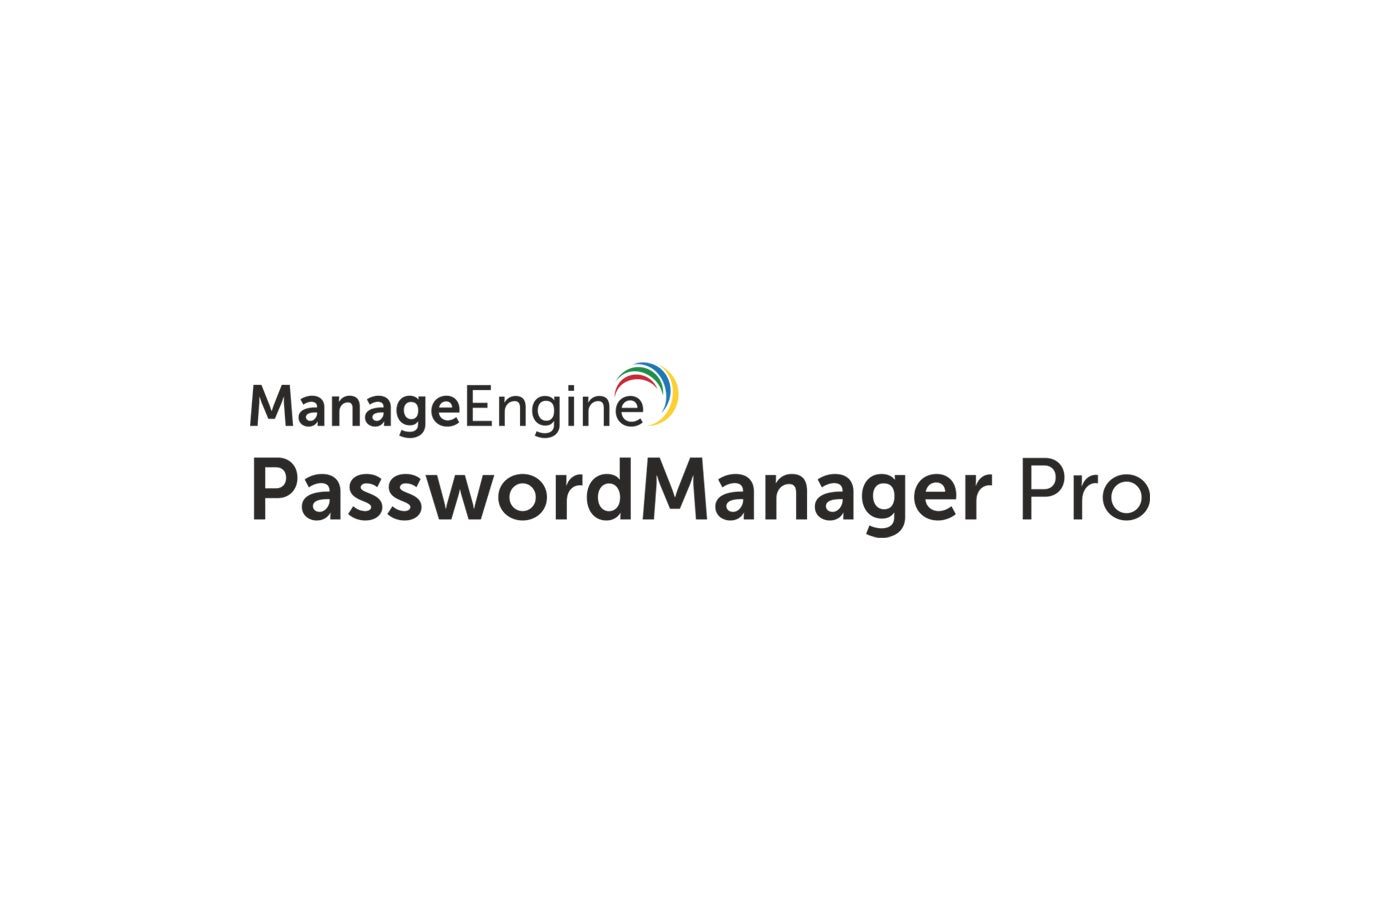 tr_20240124-how-to-use-manageengine-password-manager.jpg